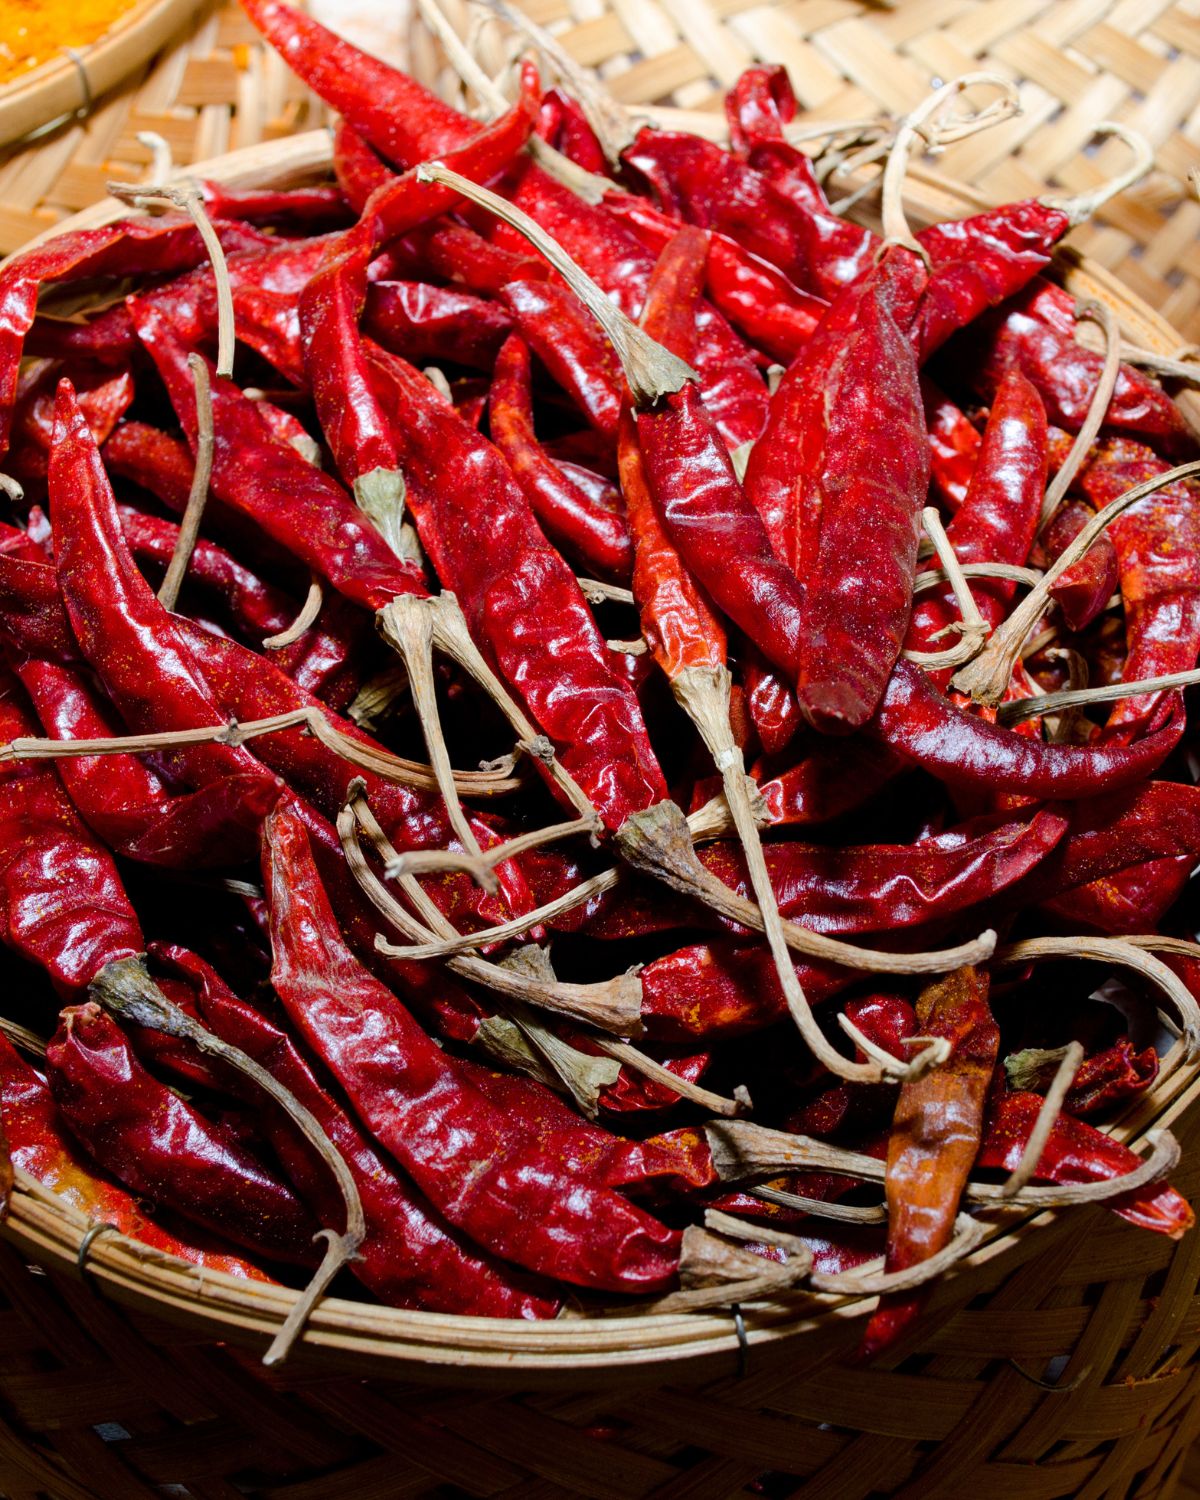 Dried chilies in a wooden basket.